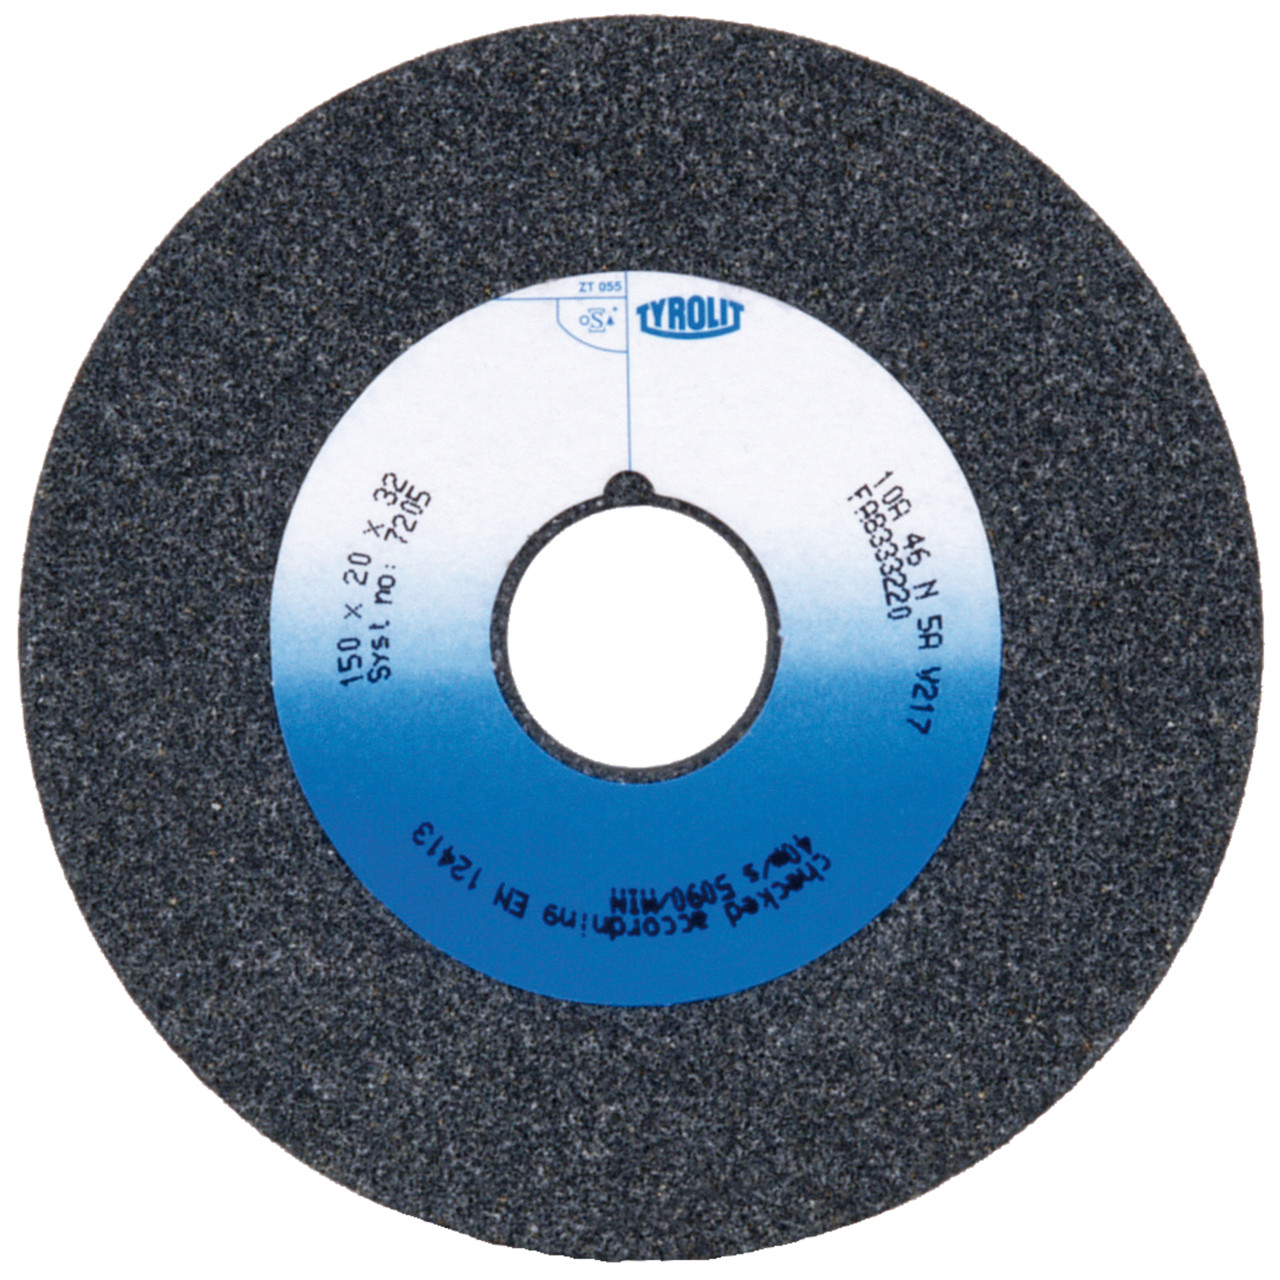 Tyrolit Conventional ceramic grinding discs DxDxH 250x32x40 For unalloyed and low-alloy steels, shape: 1, Art. 34046765